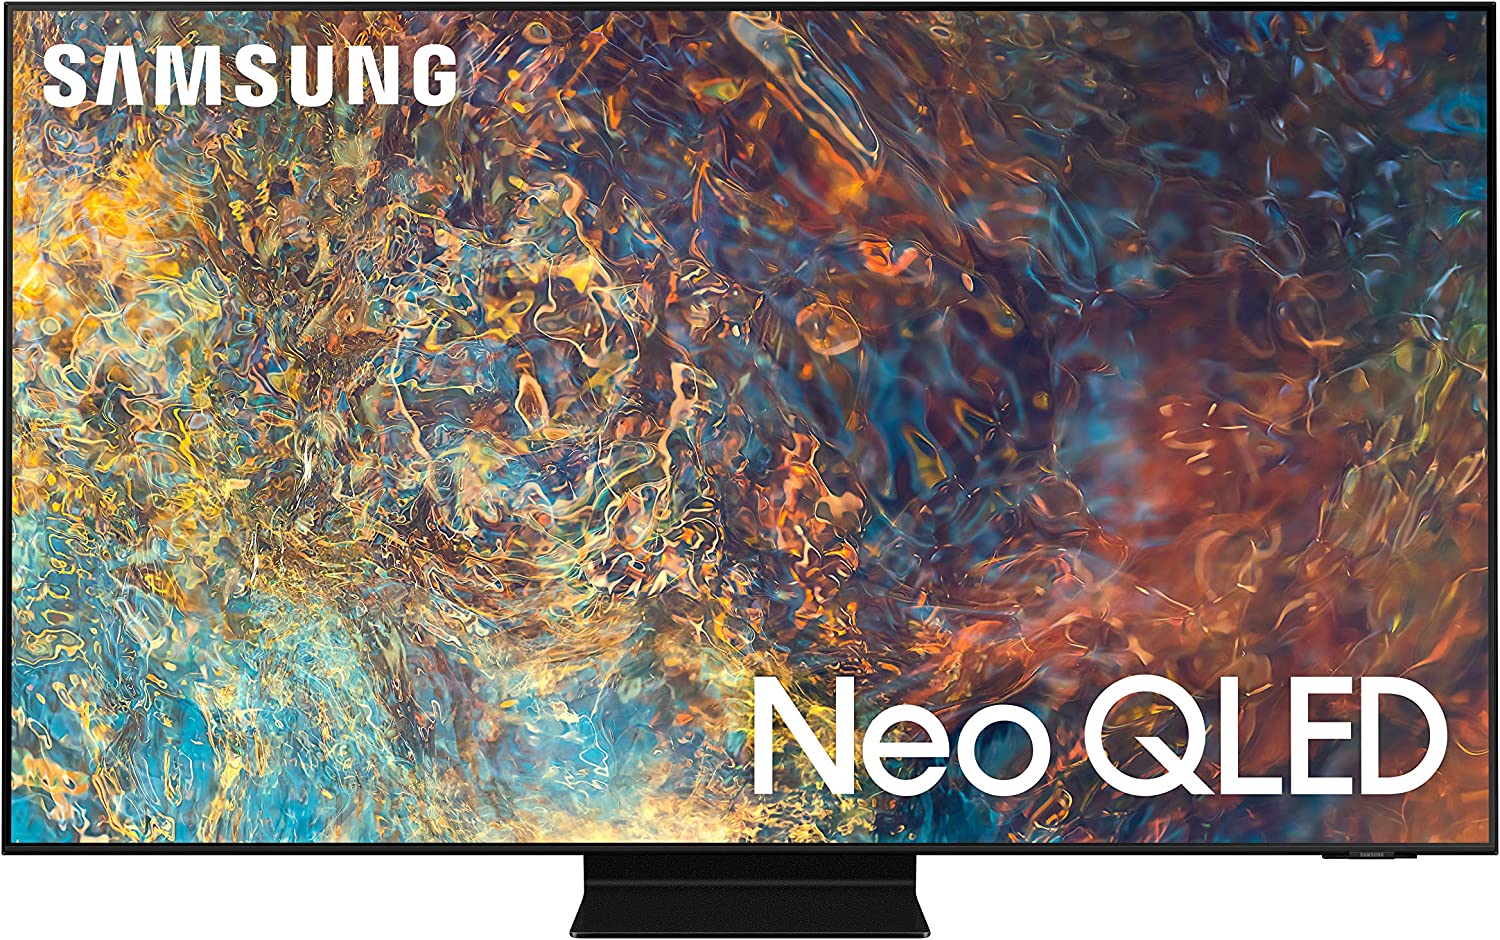 Samsung's Neo QLED is excellent for bright settings, but it can't match OLED's contrast